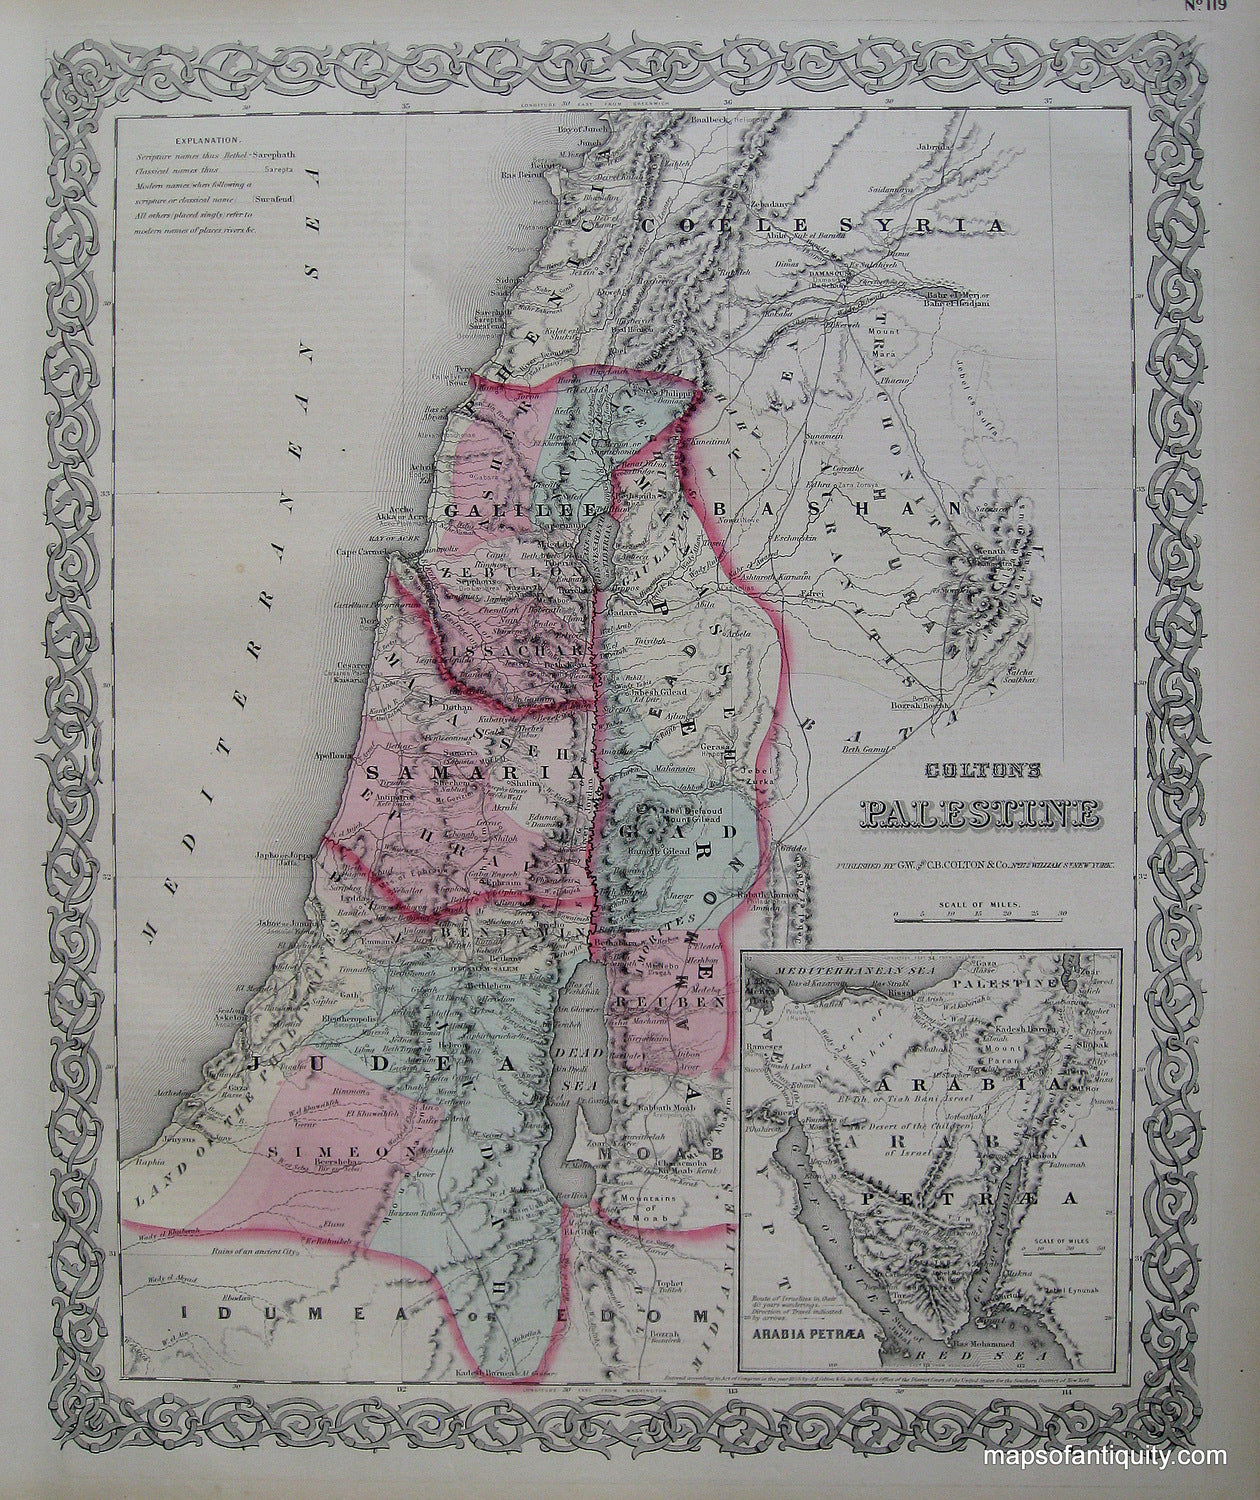 Antique-Hand-Colored-Map-Colton's-Palestine-**********-Middle-East-and-Holy-Land-Palestine-1871-Colton-Maps-Of-Antiquity